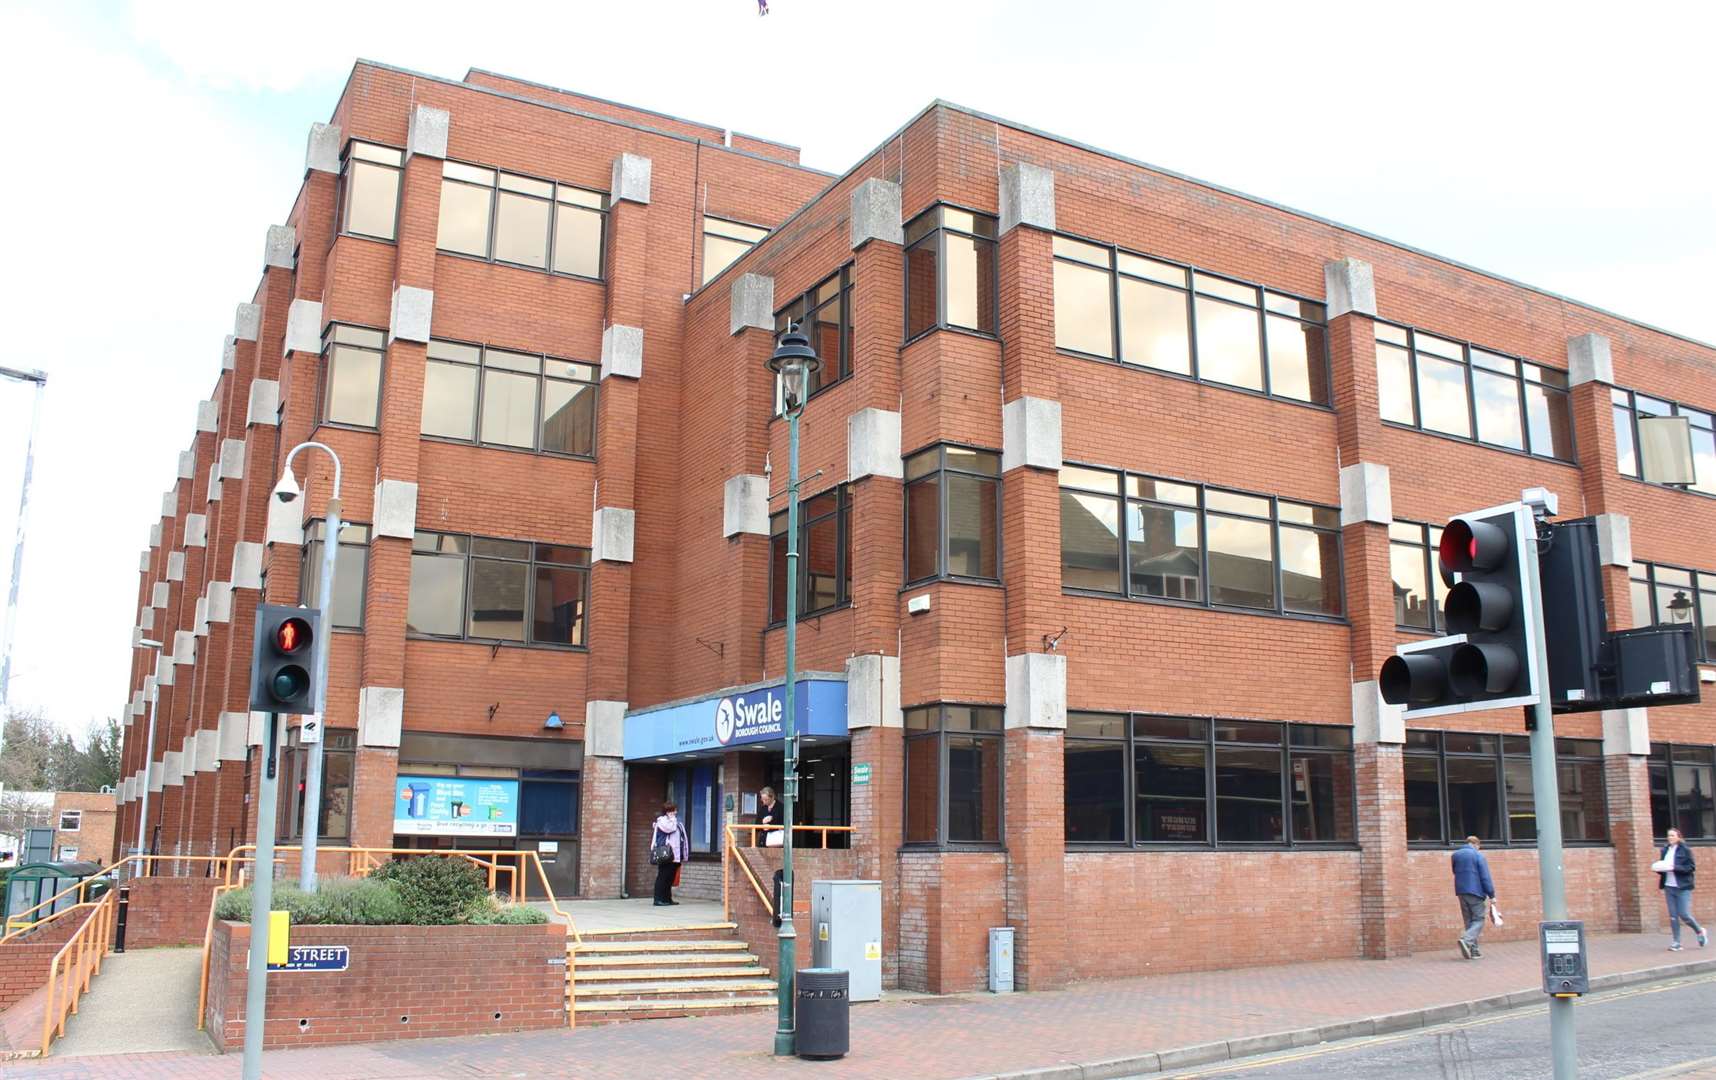 Swale council's HQ, Swale House, in East Street, Sittingbourne